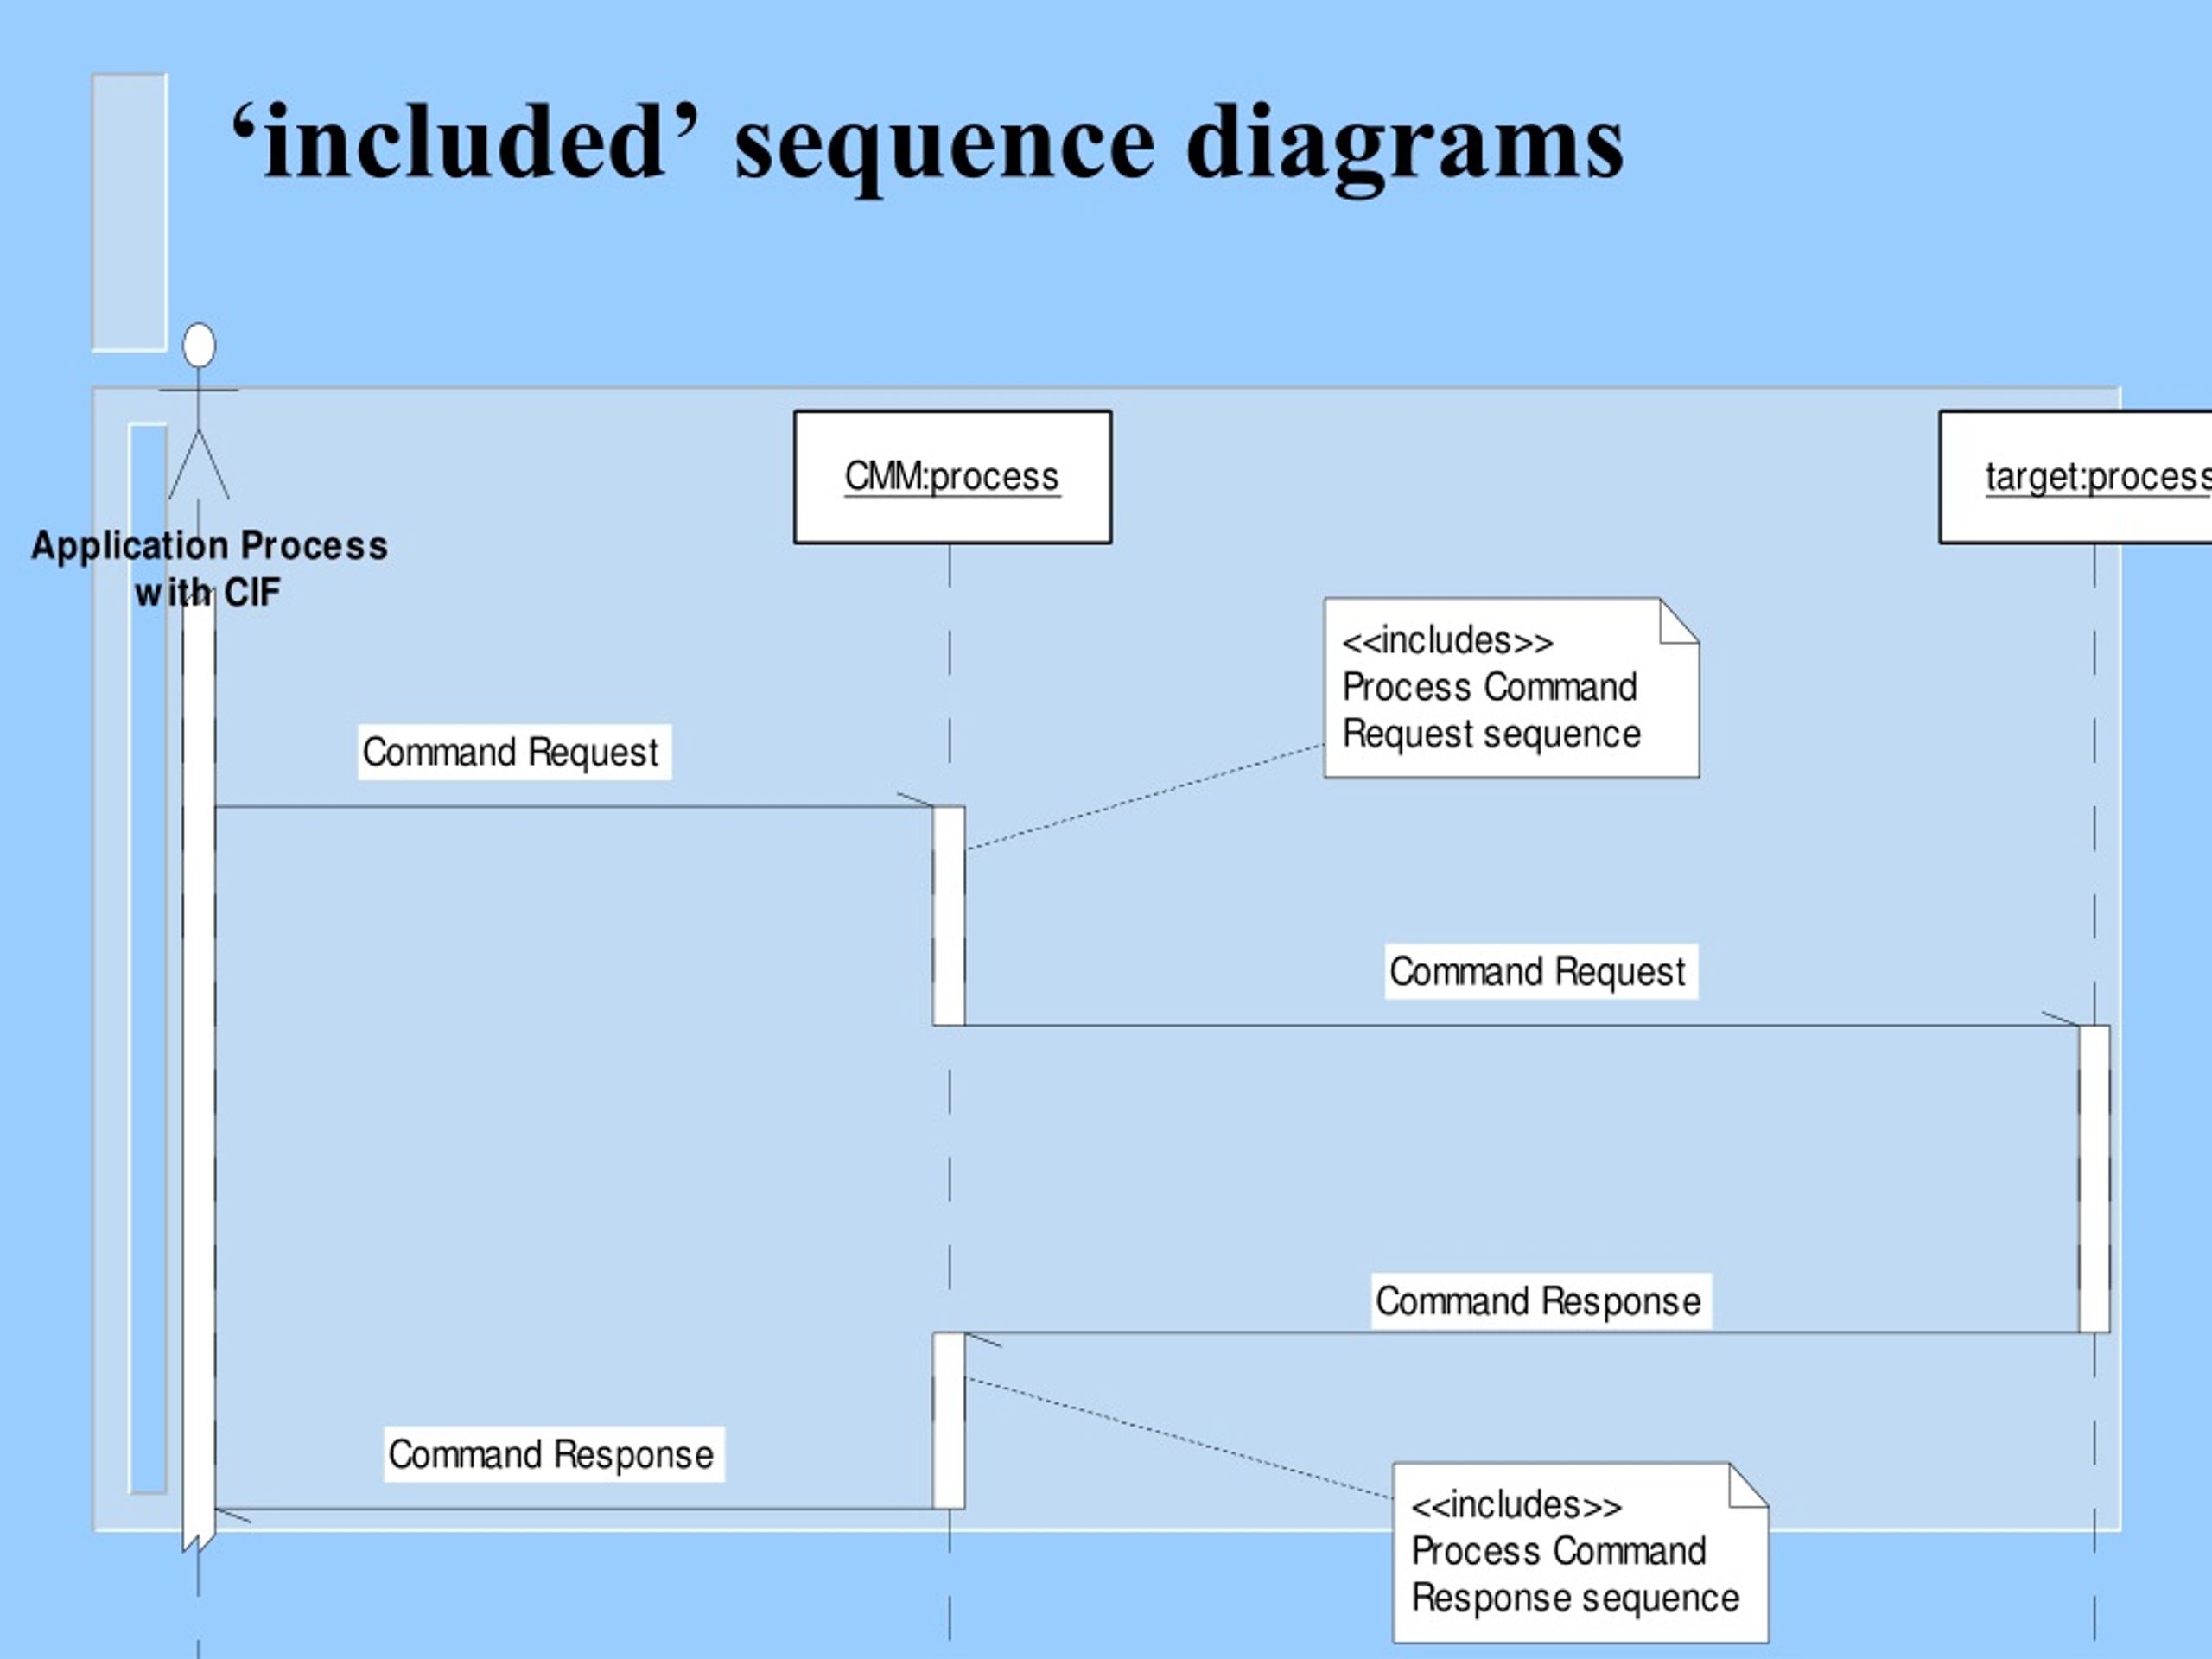 Ppt Uml Diagrams Sequence Diagrams The Requirements Model And The Dynamic Analysis Model 2532